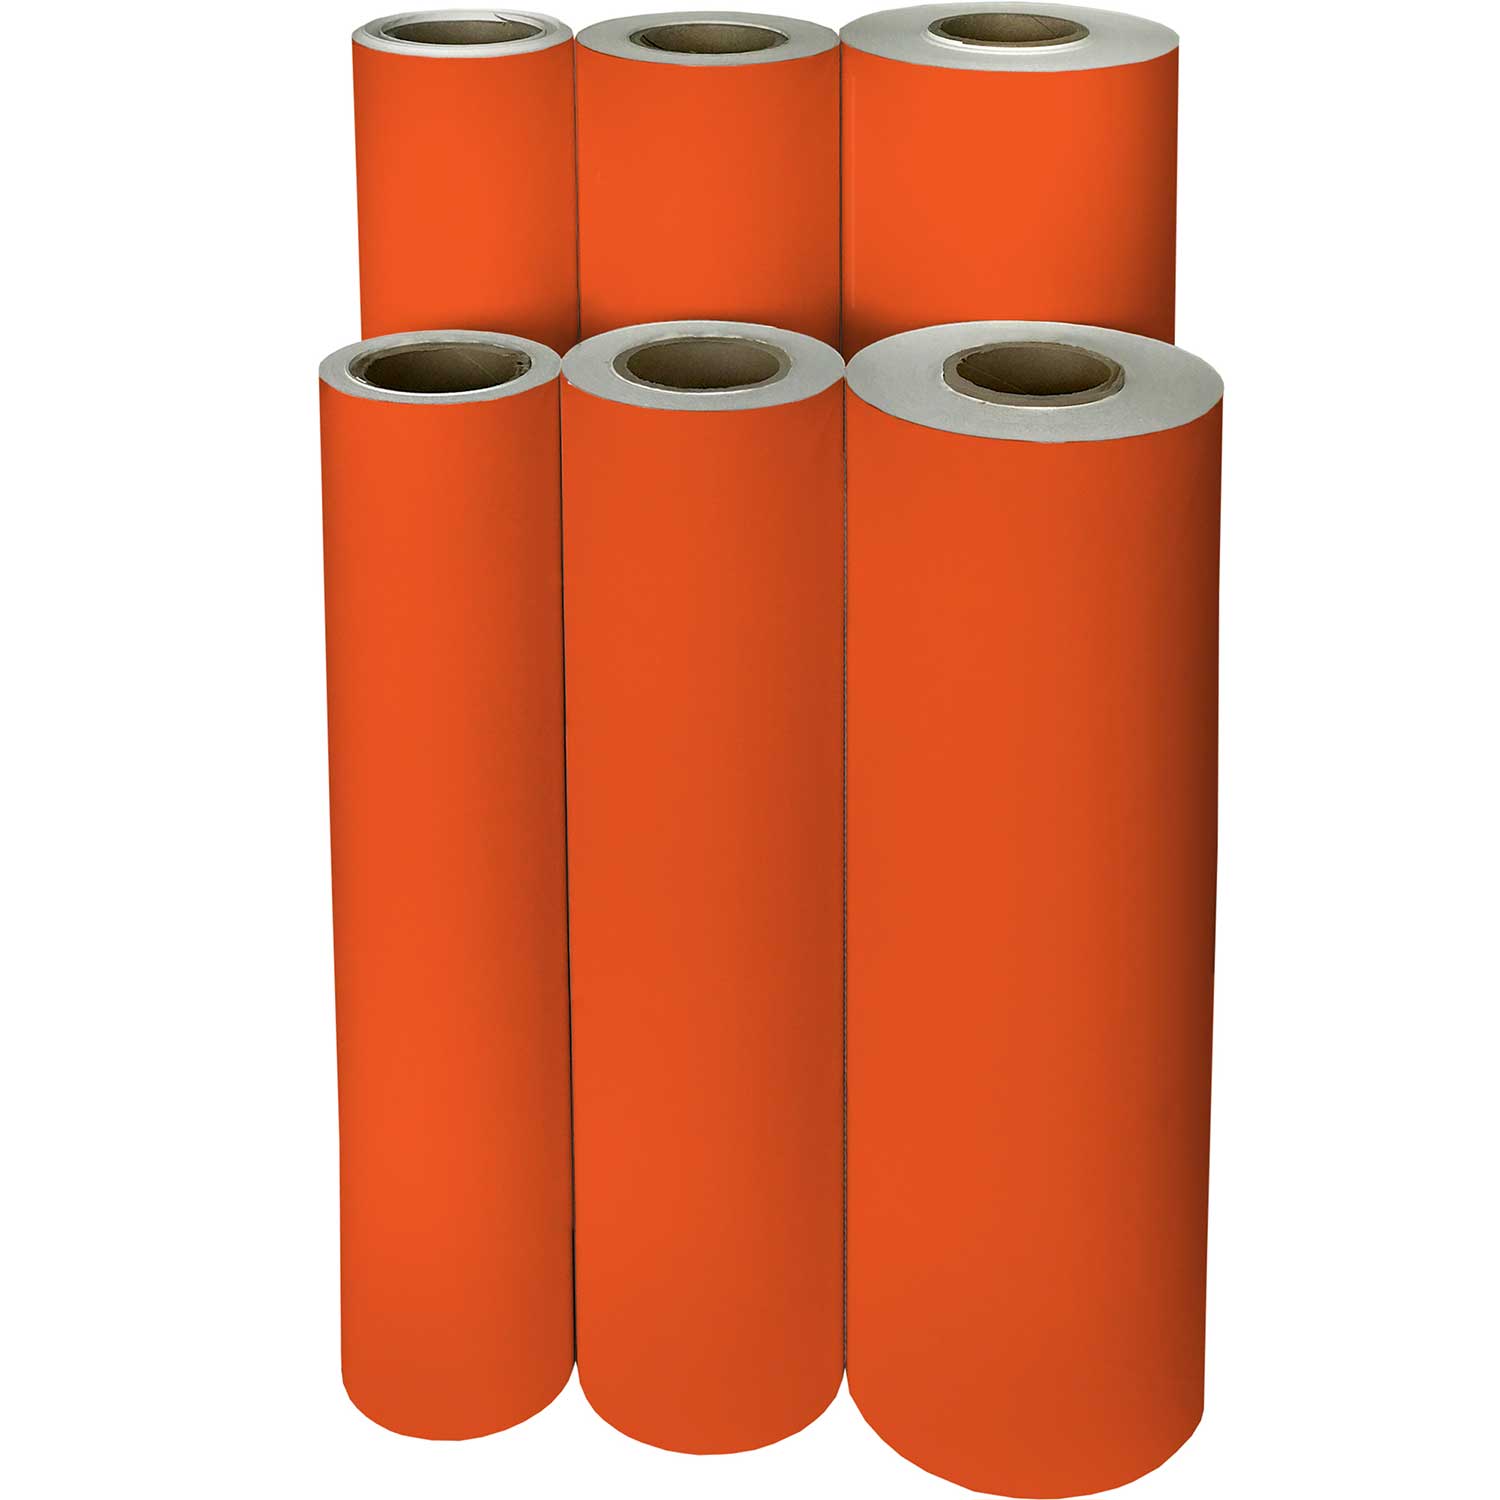 30 inch x 417' Casablanca Coral Gift Wrap by Paper Mart, Size: 417' x 30'' | Quantity of: 1, Orange